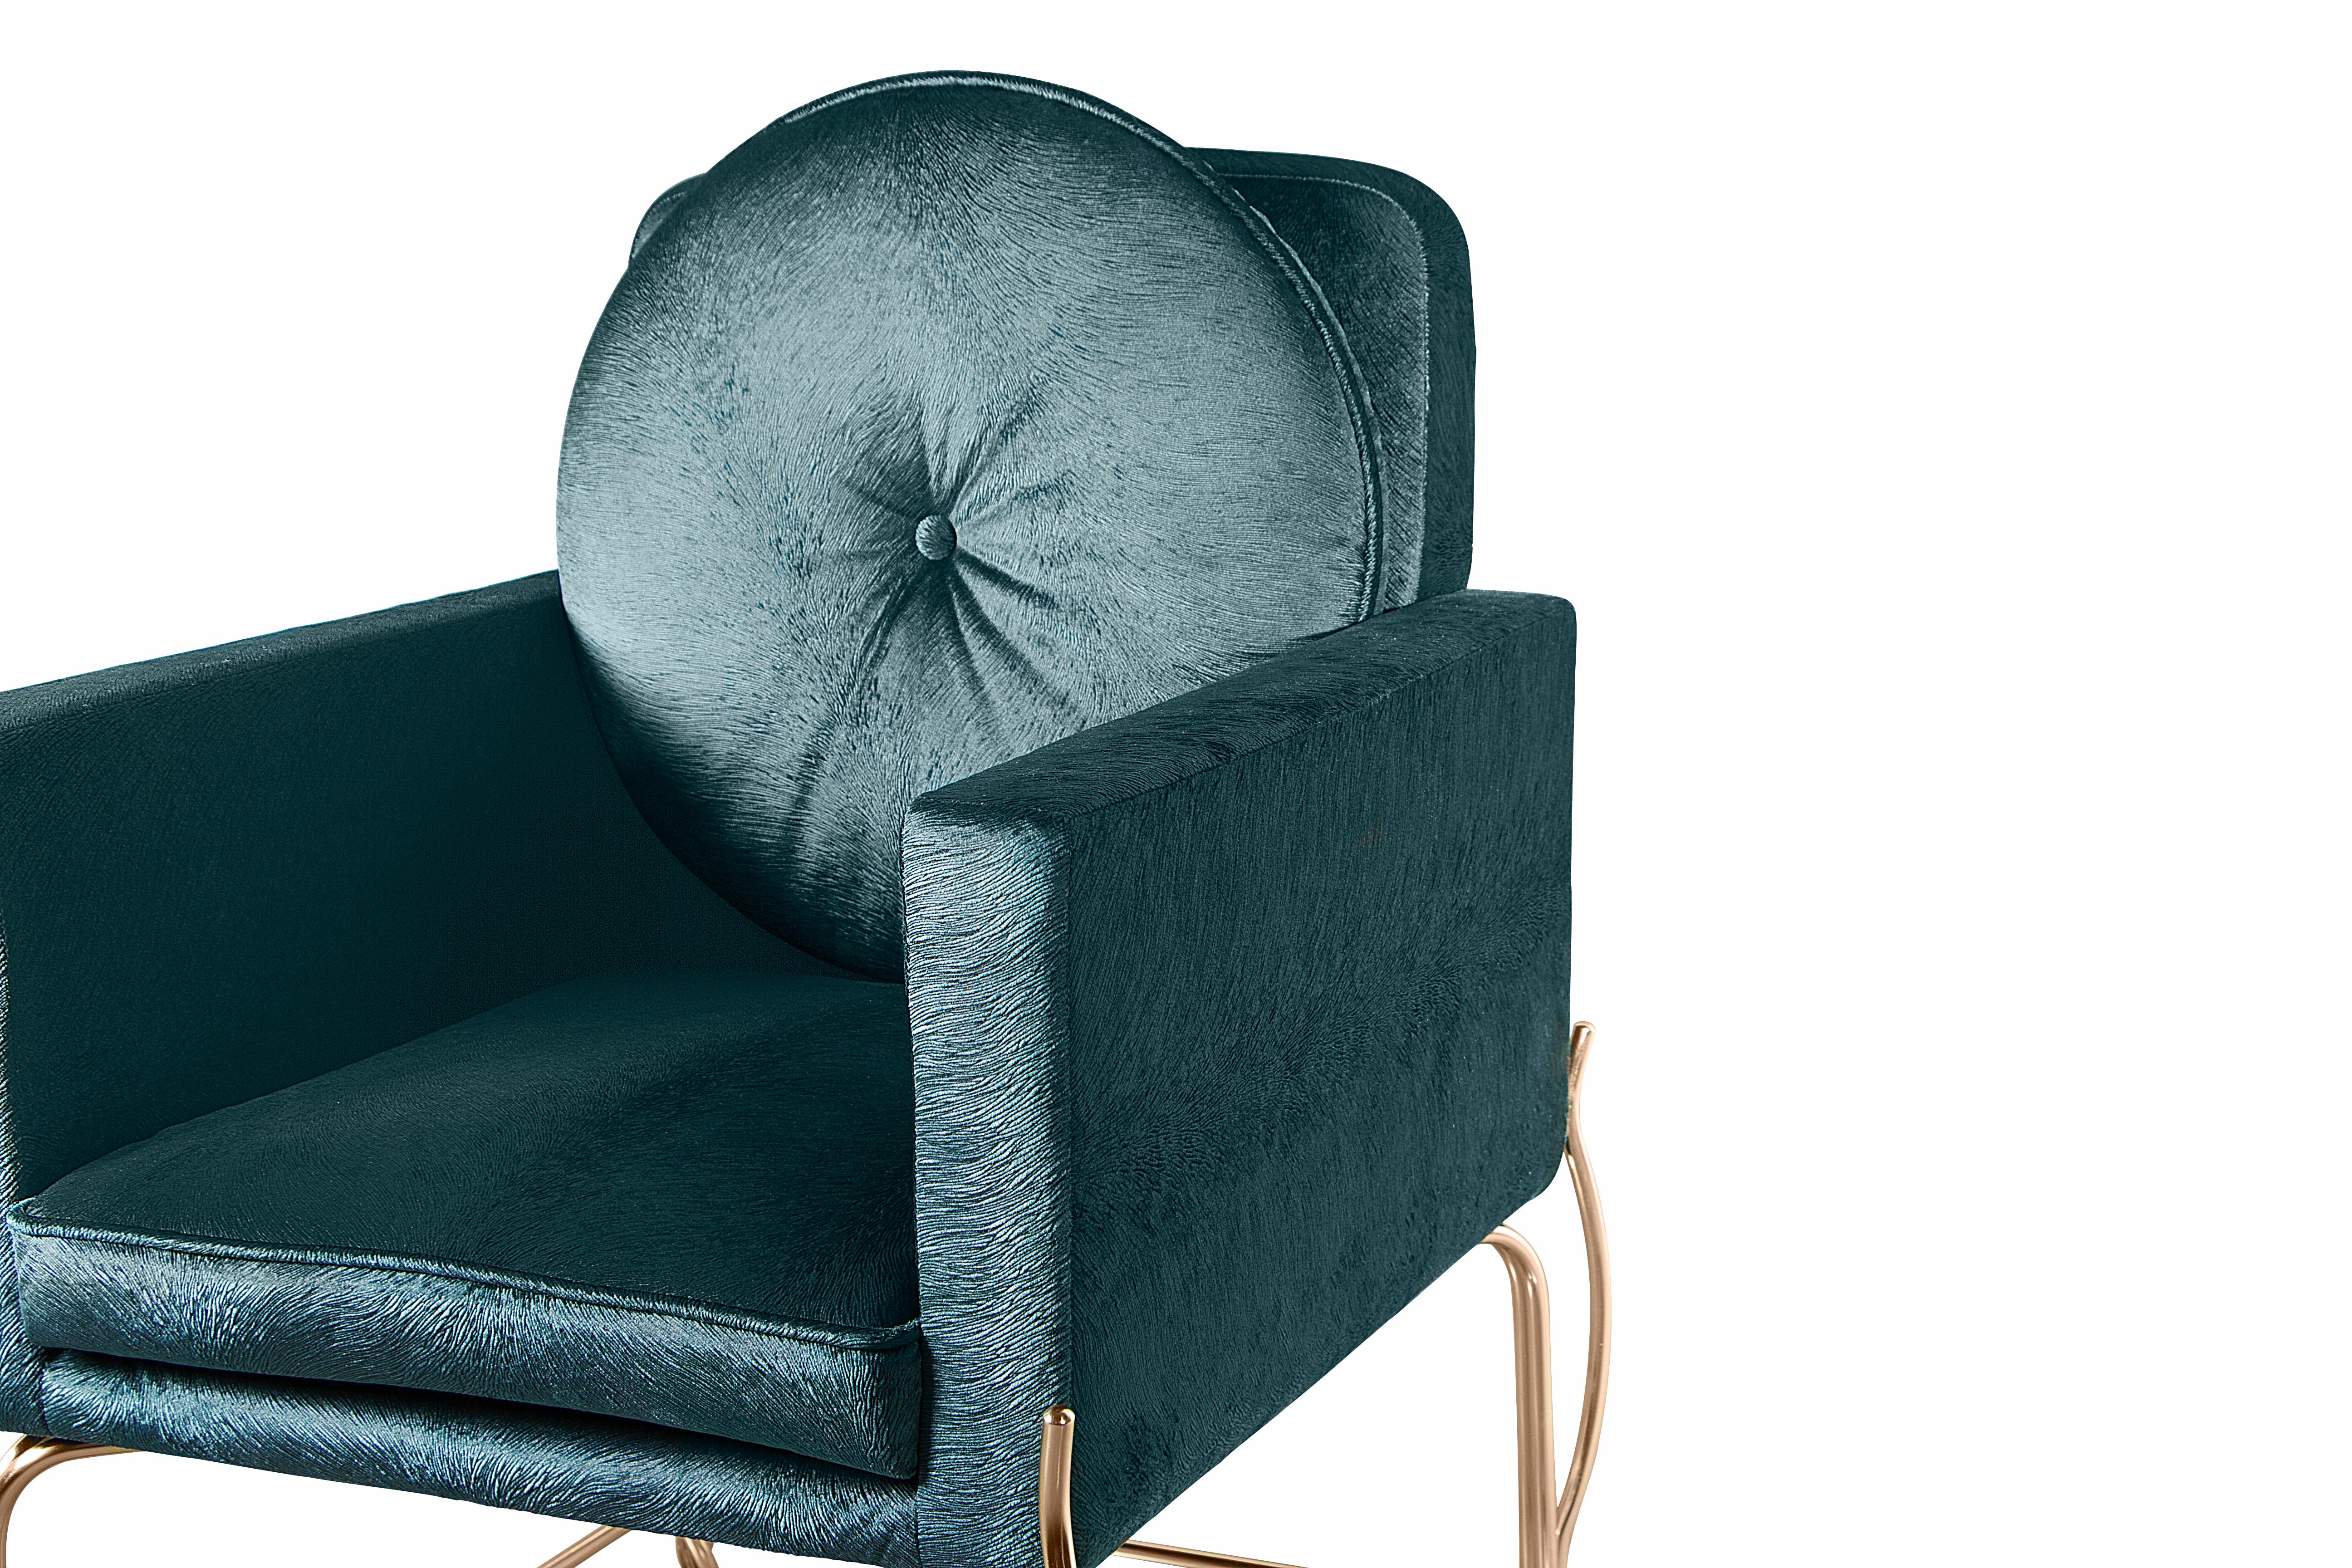 Hollywood Regency is brought to life with this fabulous dinning or desk chair. The sculptural metal base gives us a hint of feminine curves while the upholstery is takes us to a retro modern period.

Options
Upholstery: Available in any upholstery